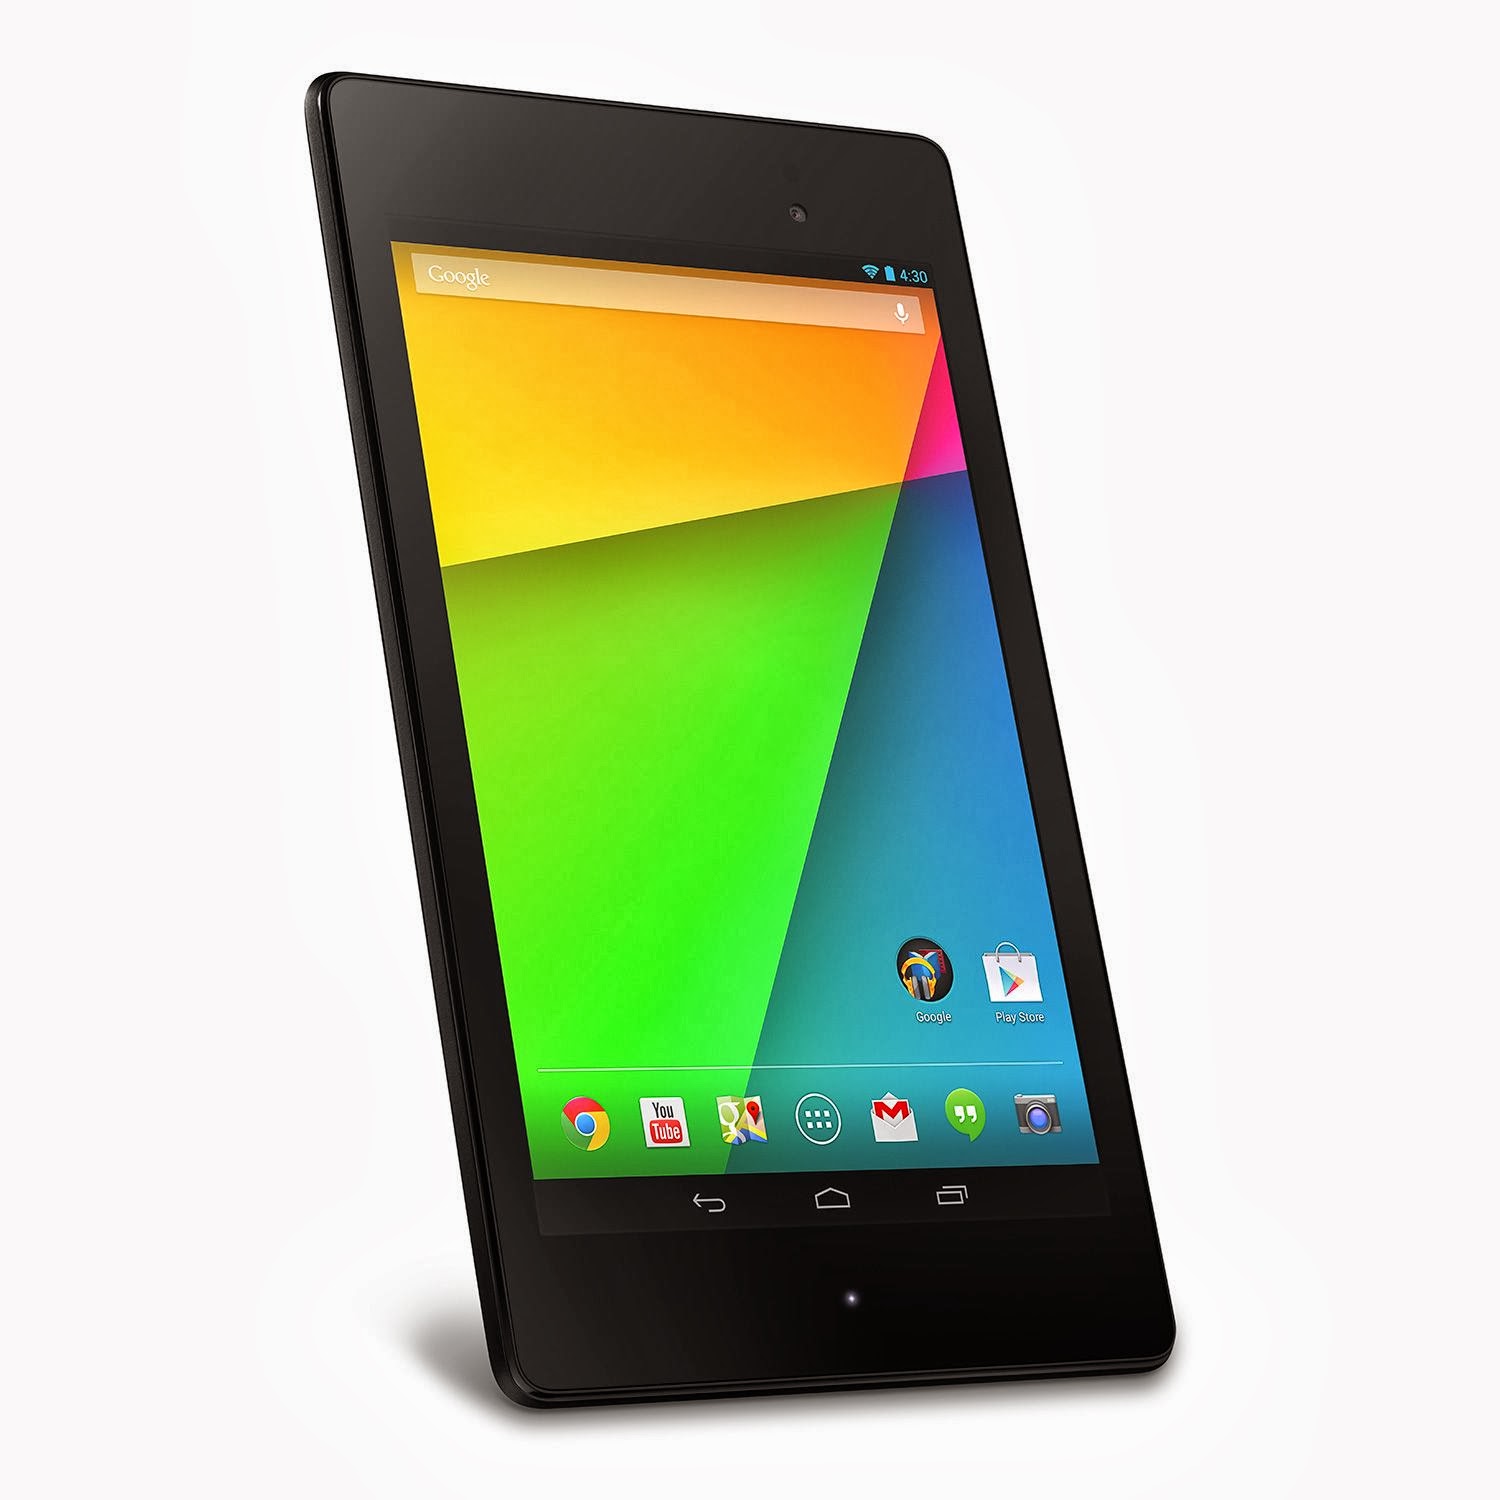 Google Nexus 7 (2013) review: Specs, features and analysis 